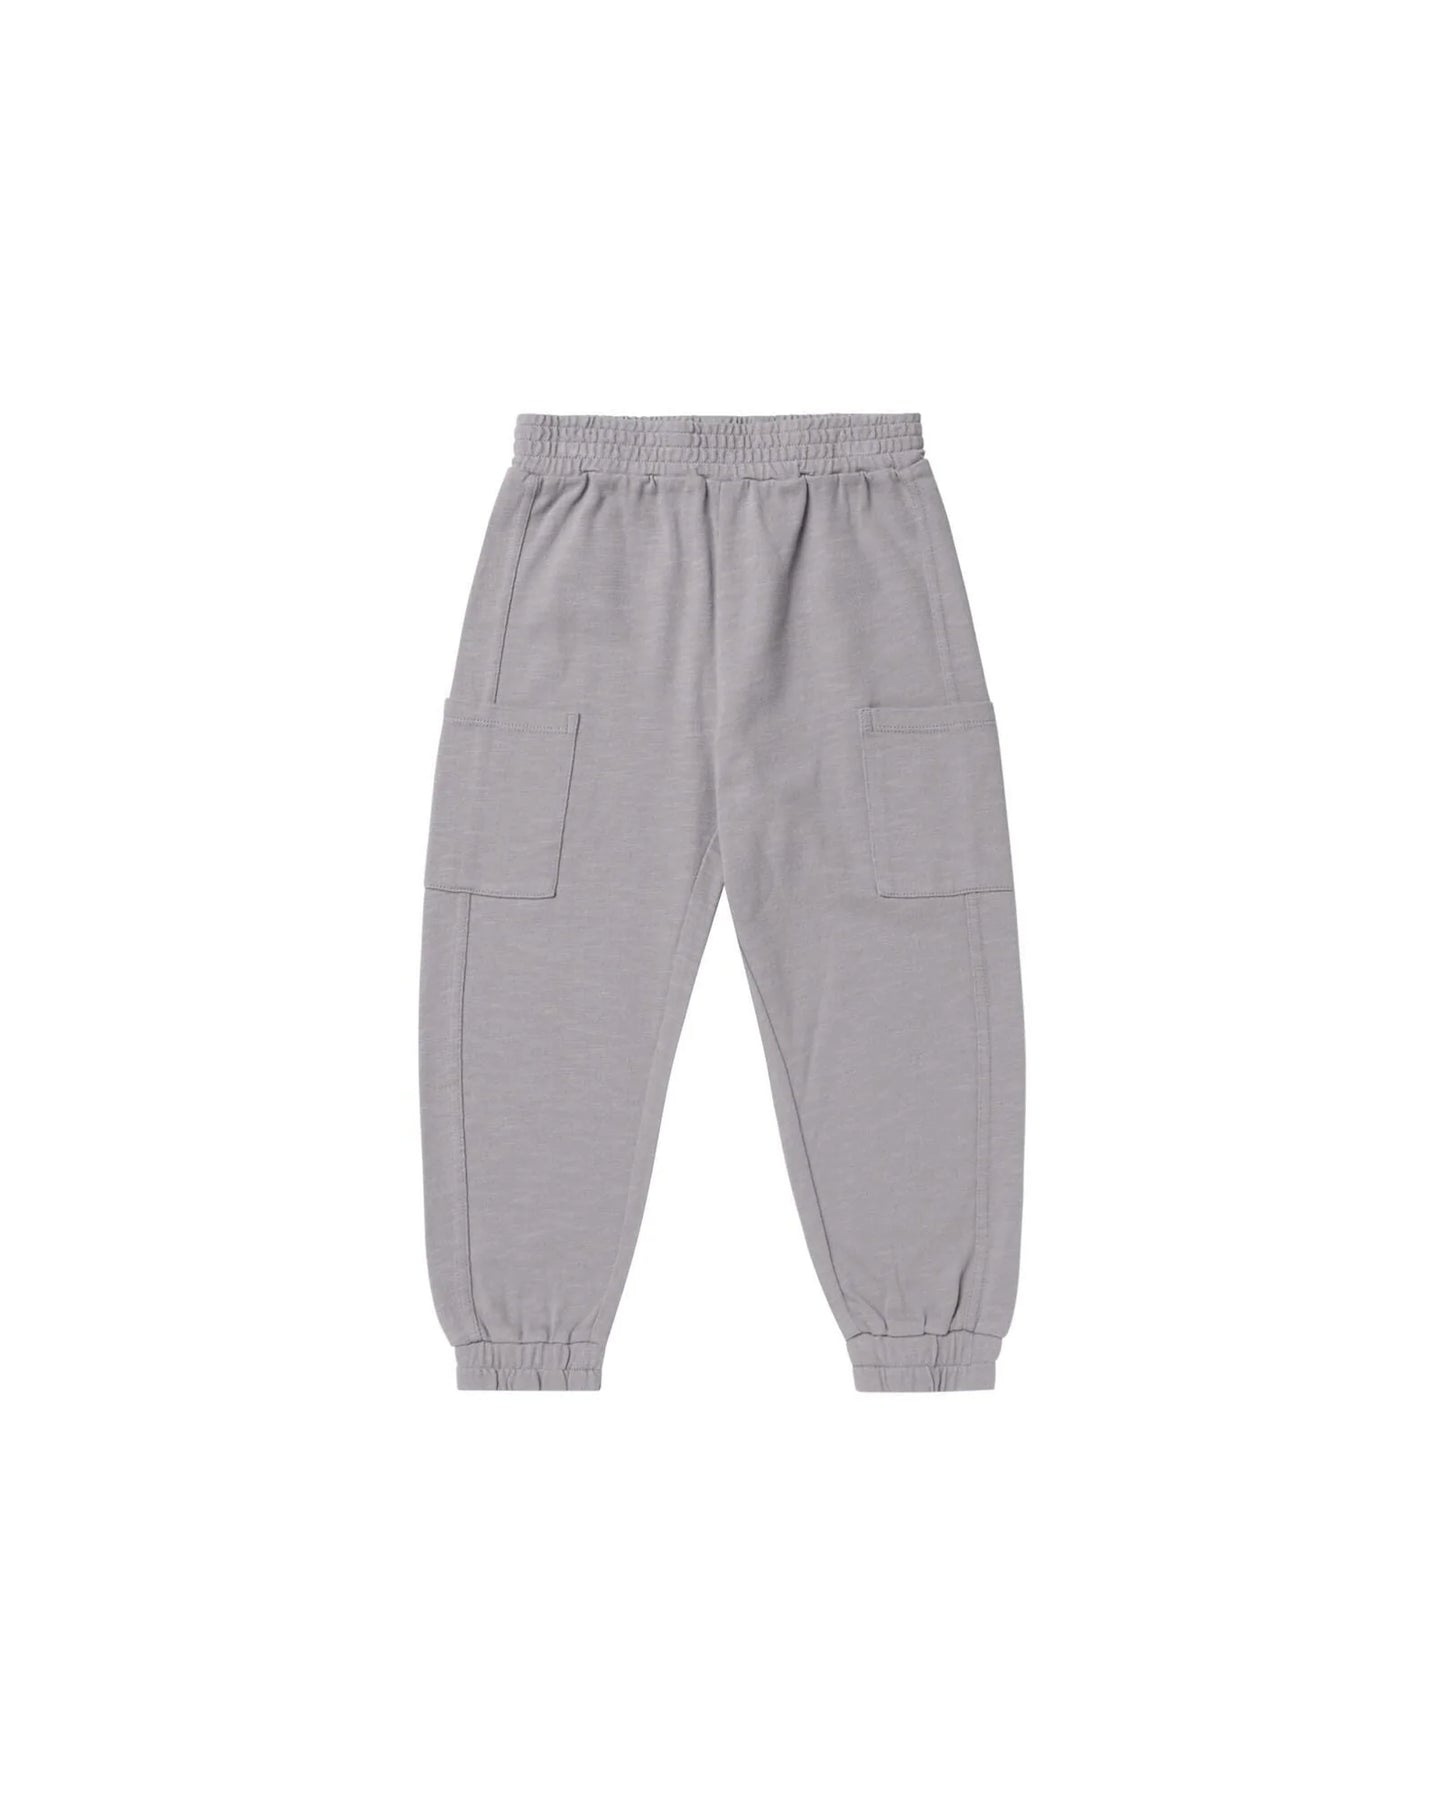 Rylee + Cru - Jogger Pant in French Blue